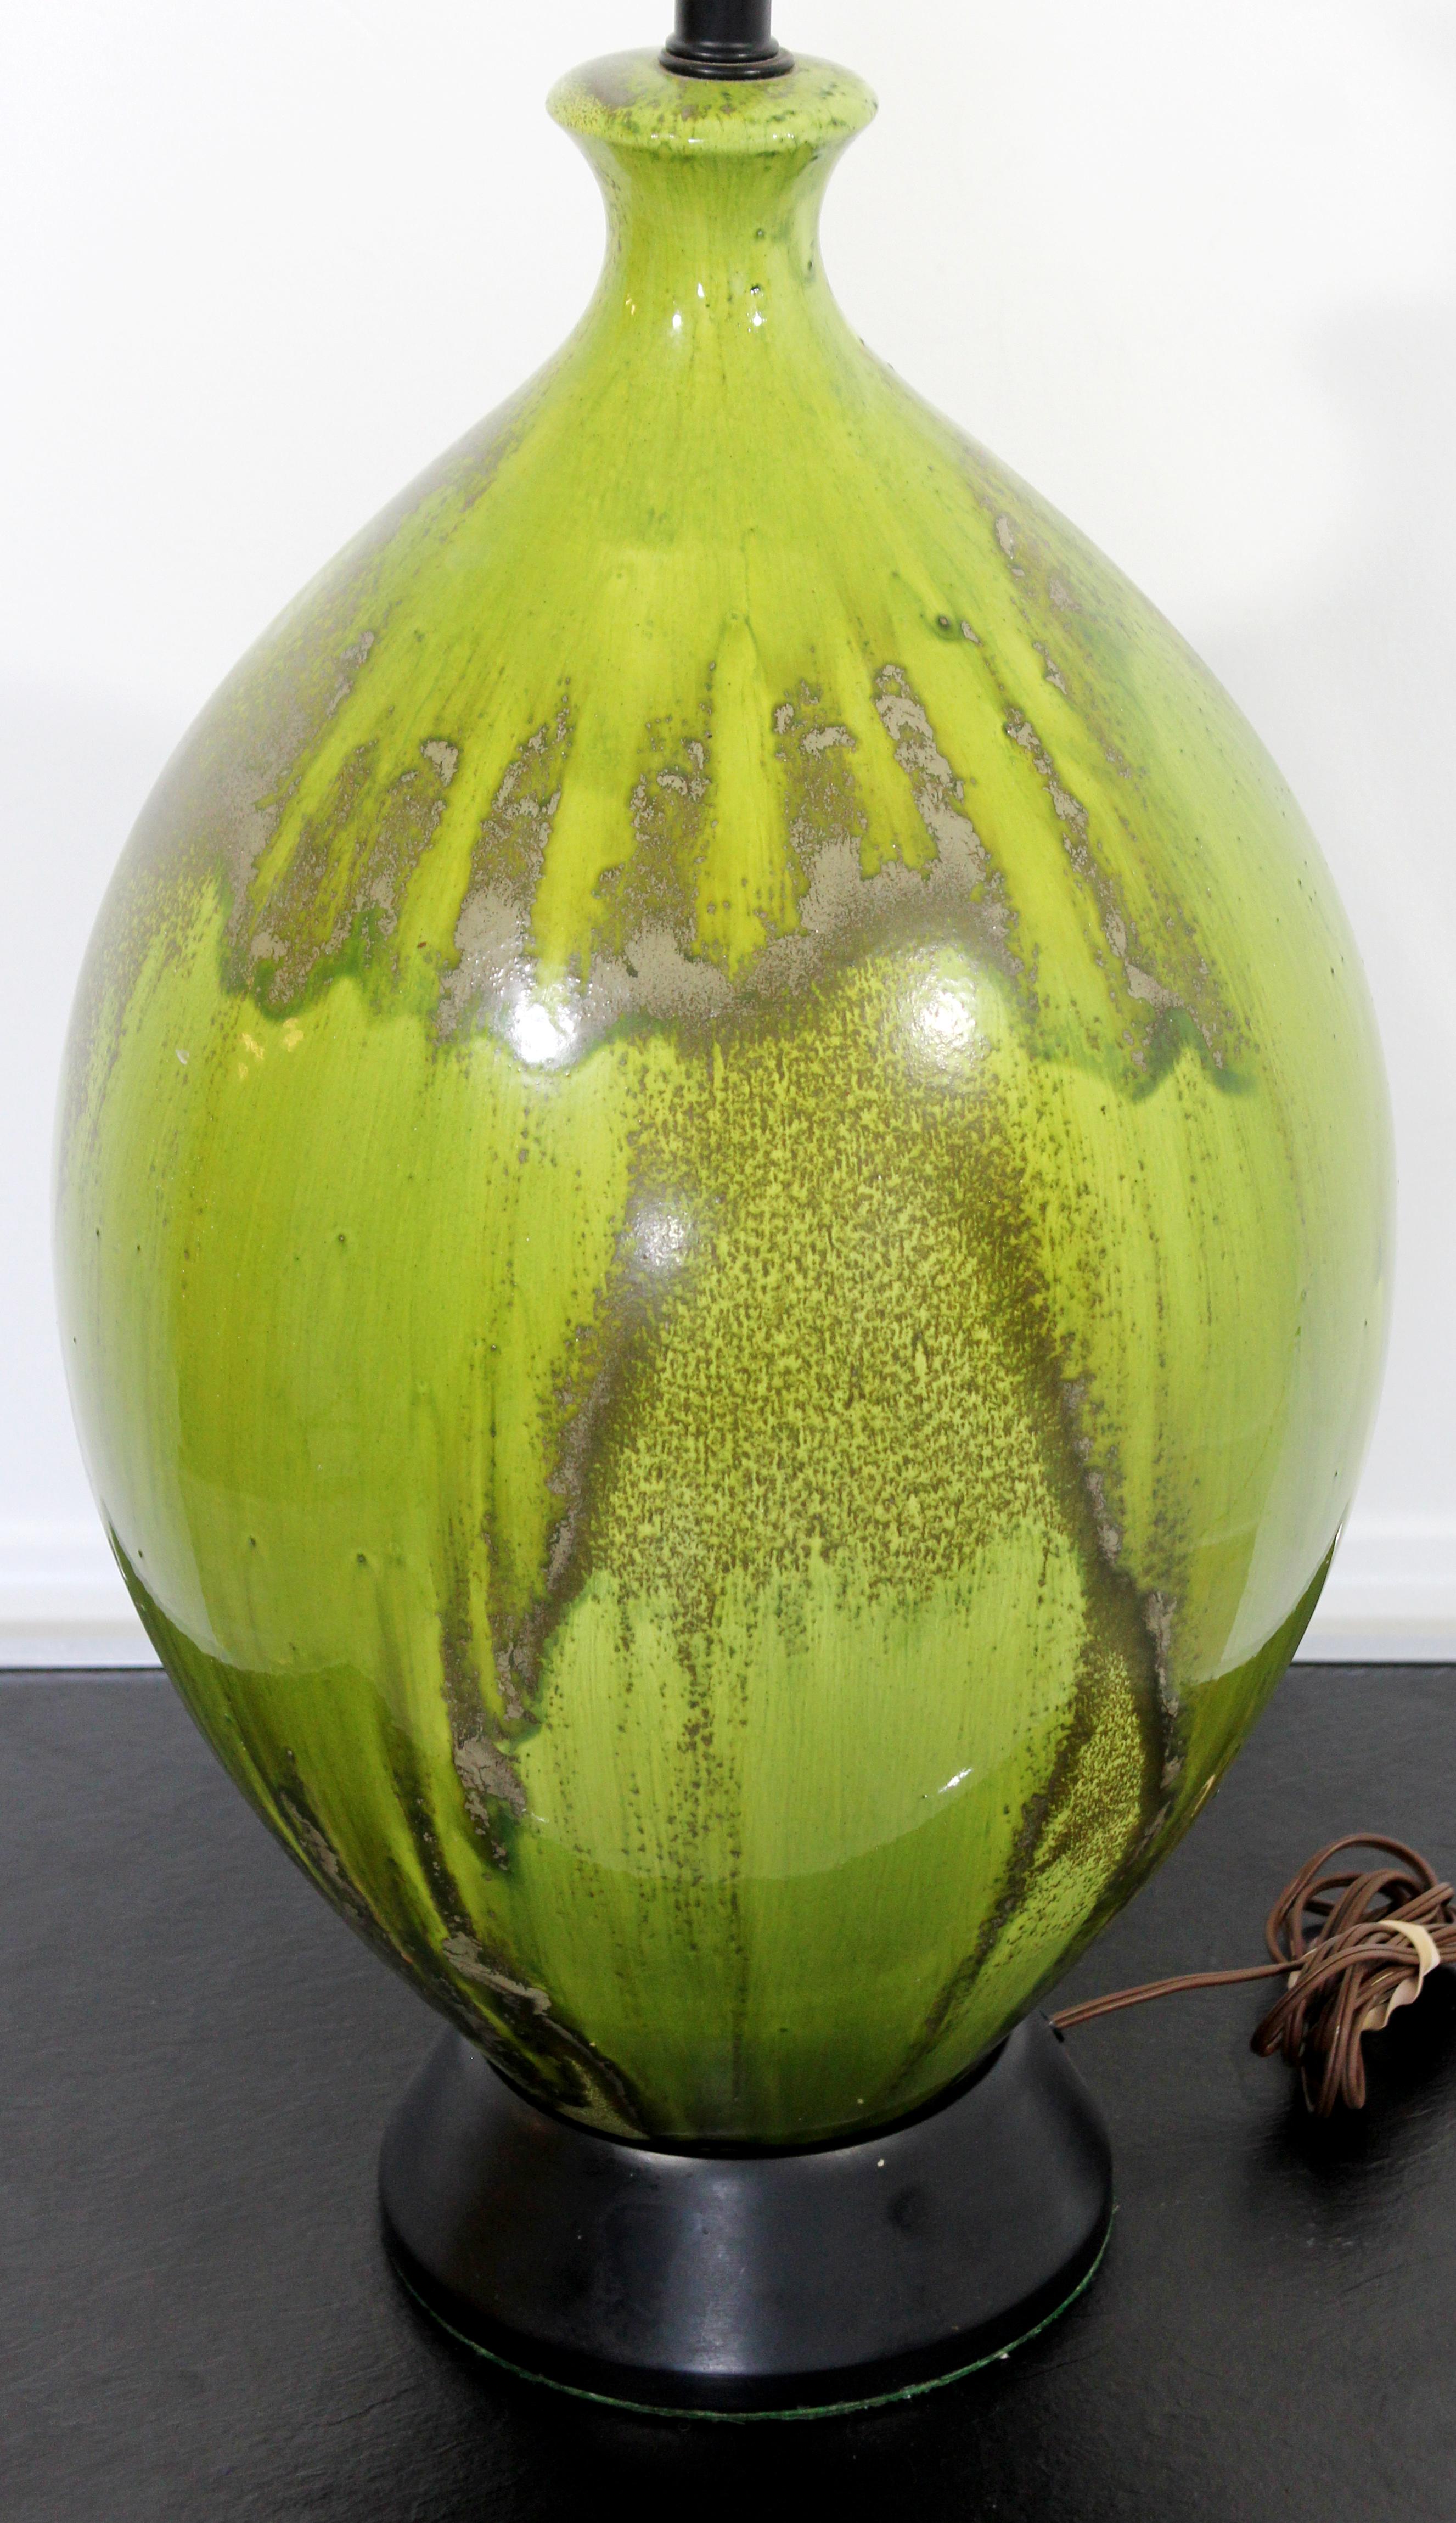 For your consideration is a fantastic, large, green ceramic, drip glaze table lamp, with its original brass finial, circa the 1970s. The dimensions are 11